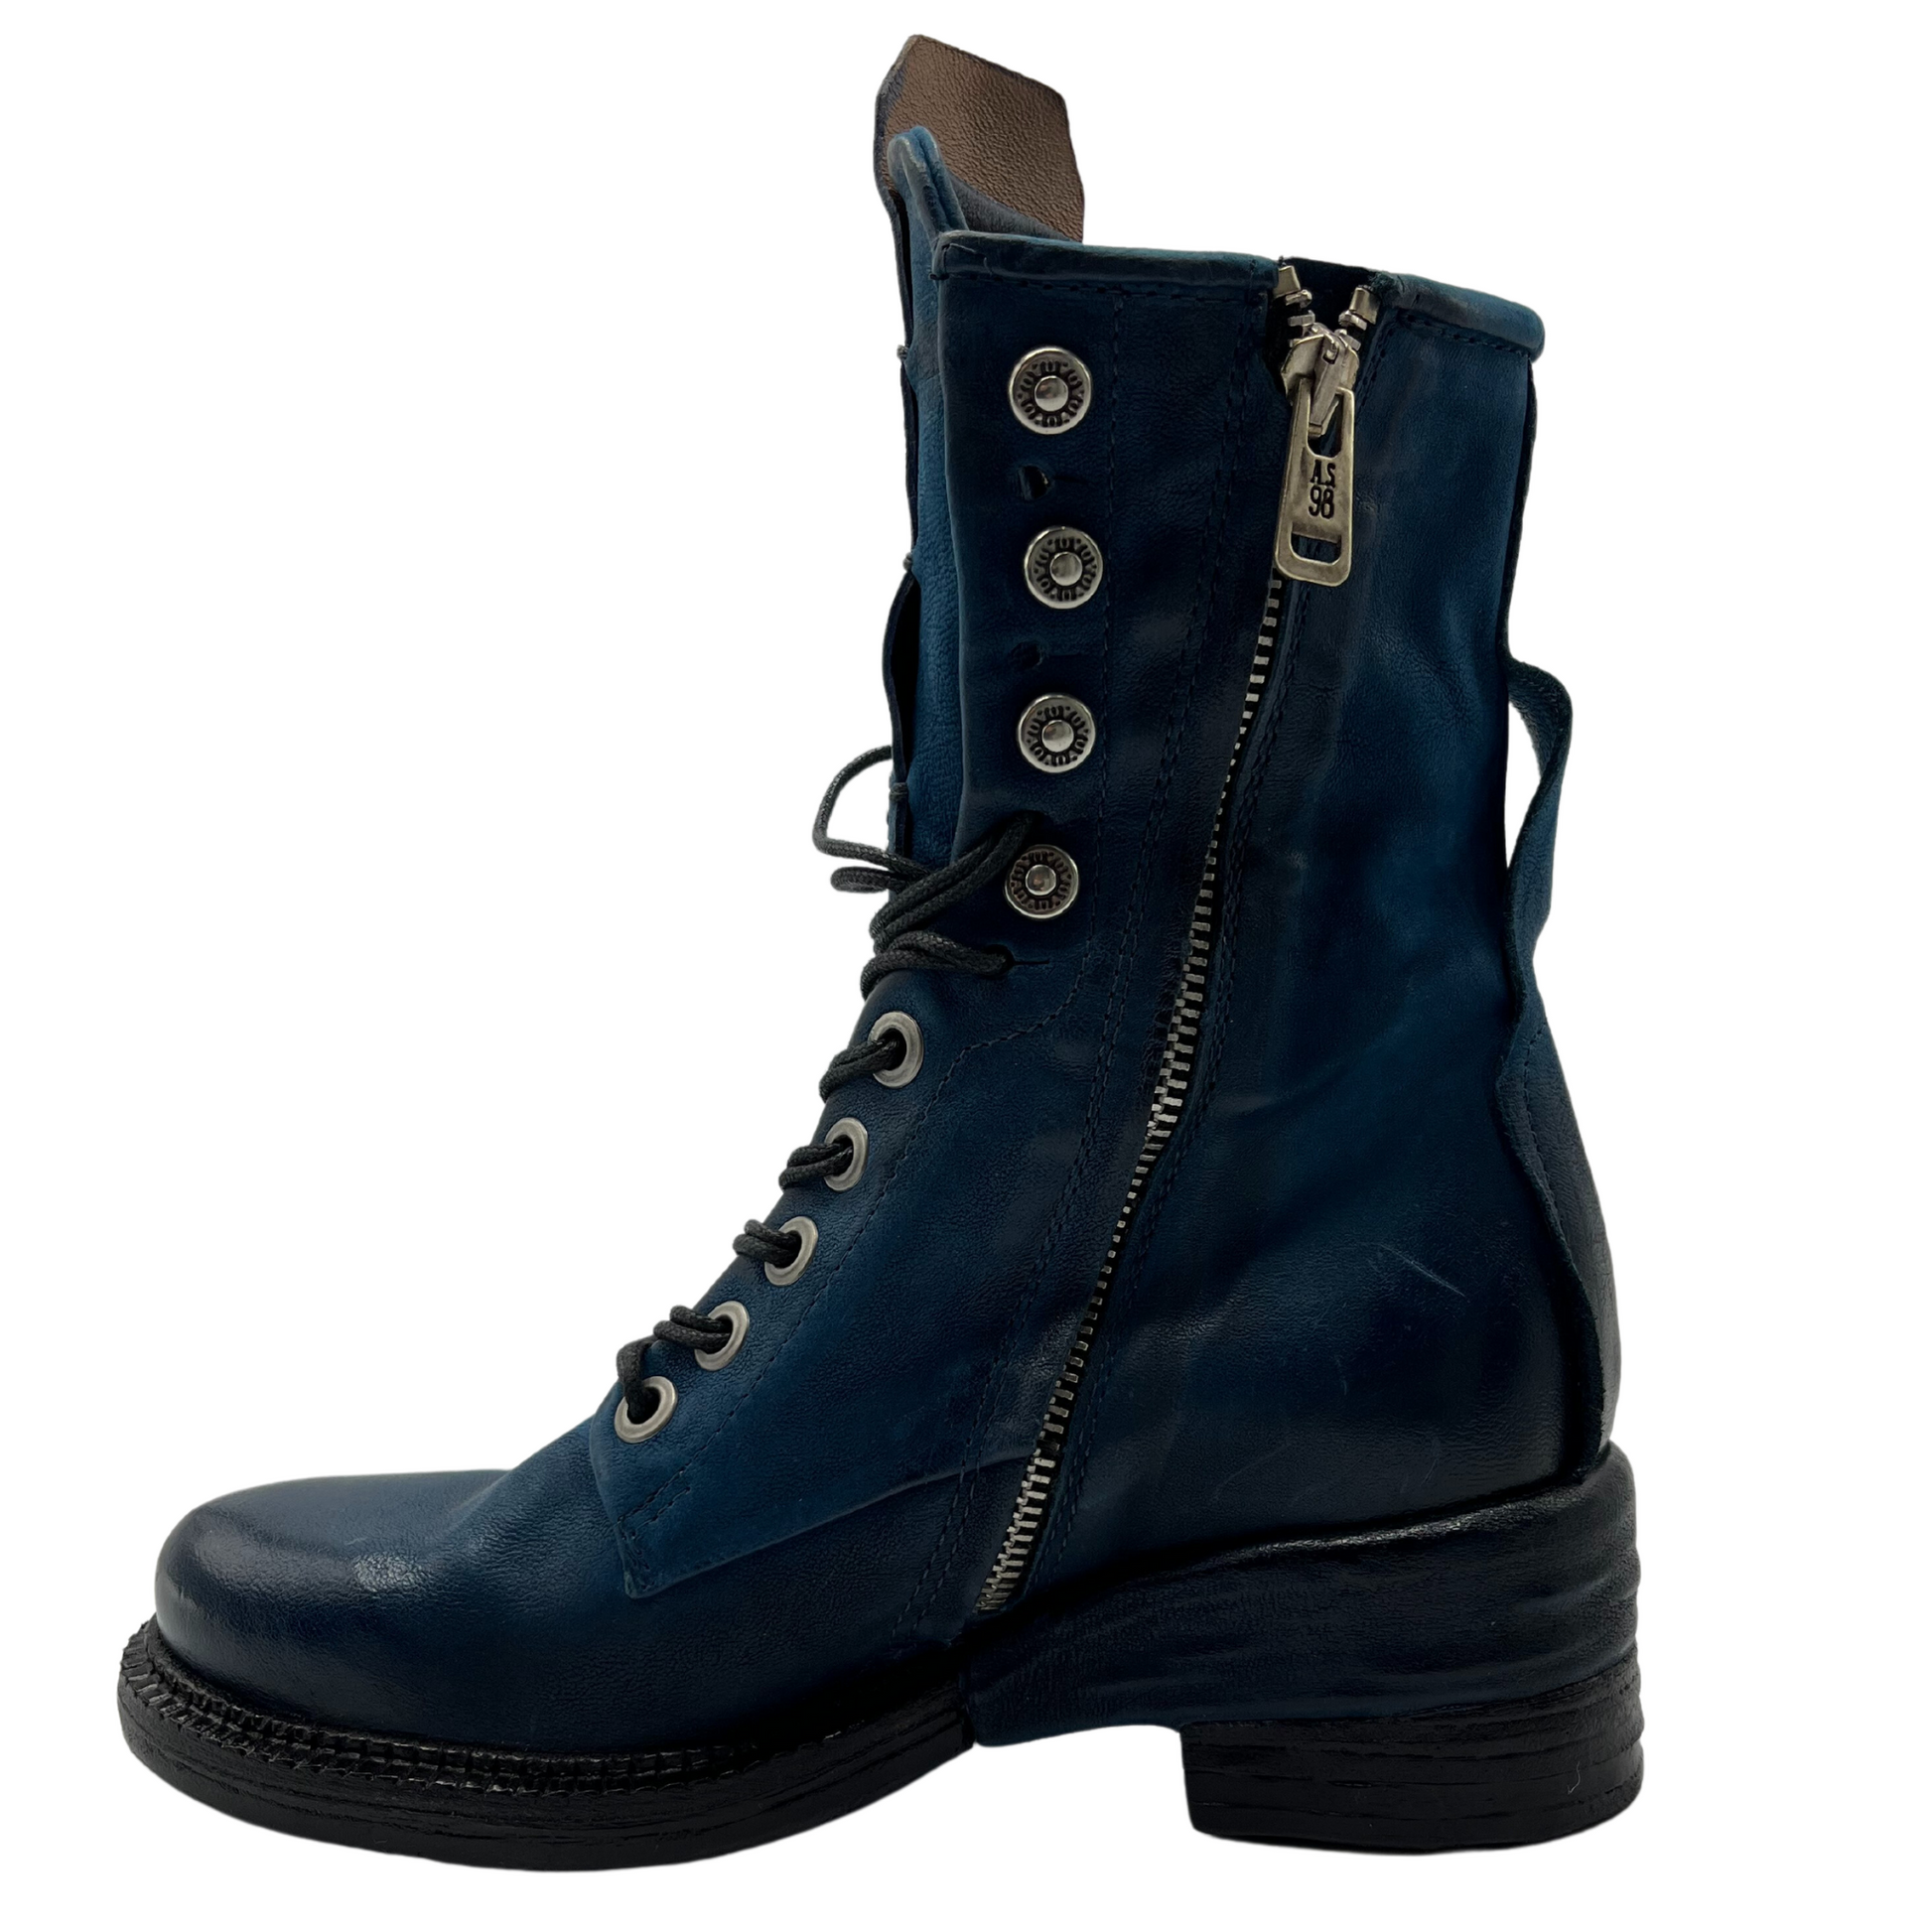 Left facing view of blue leather boot with silver side zipper closure and short block heel